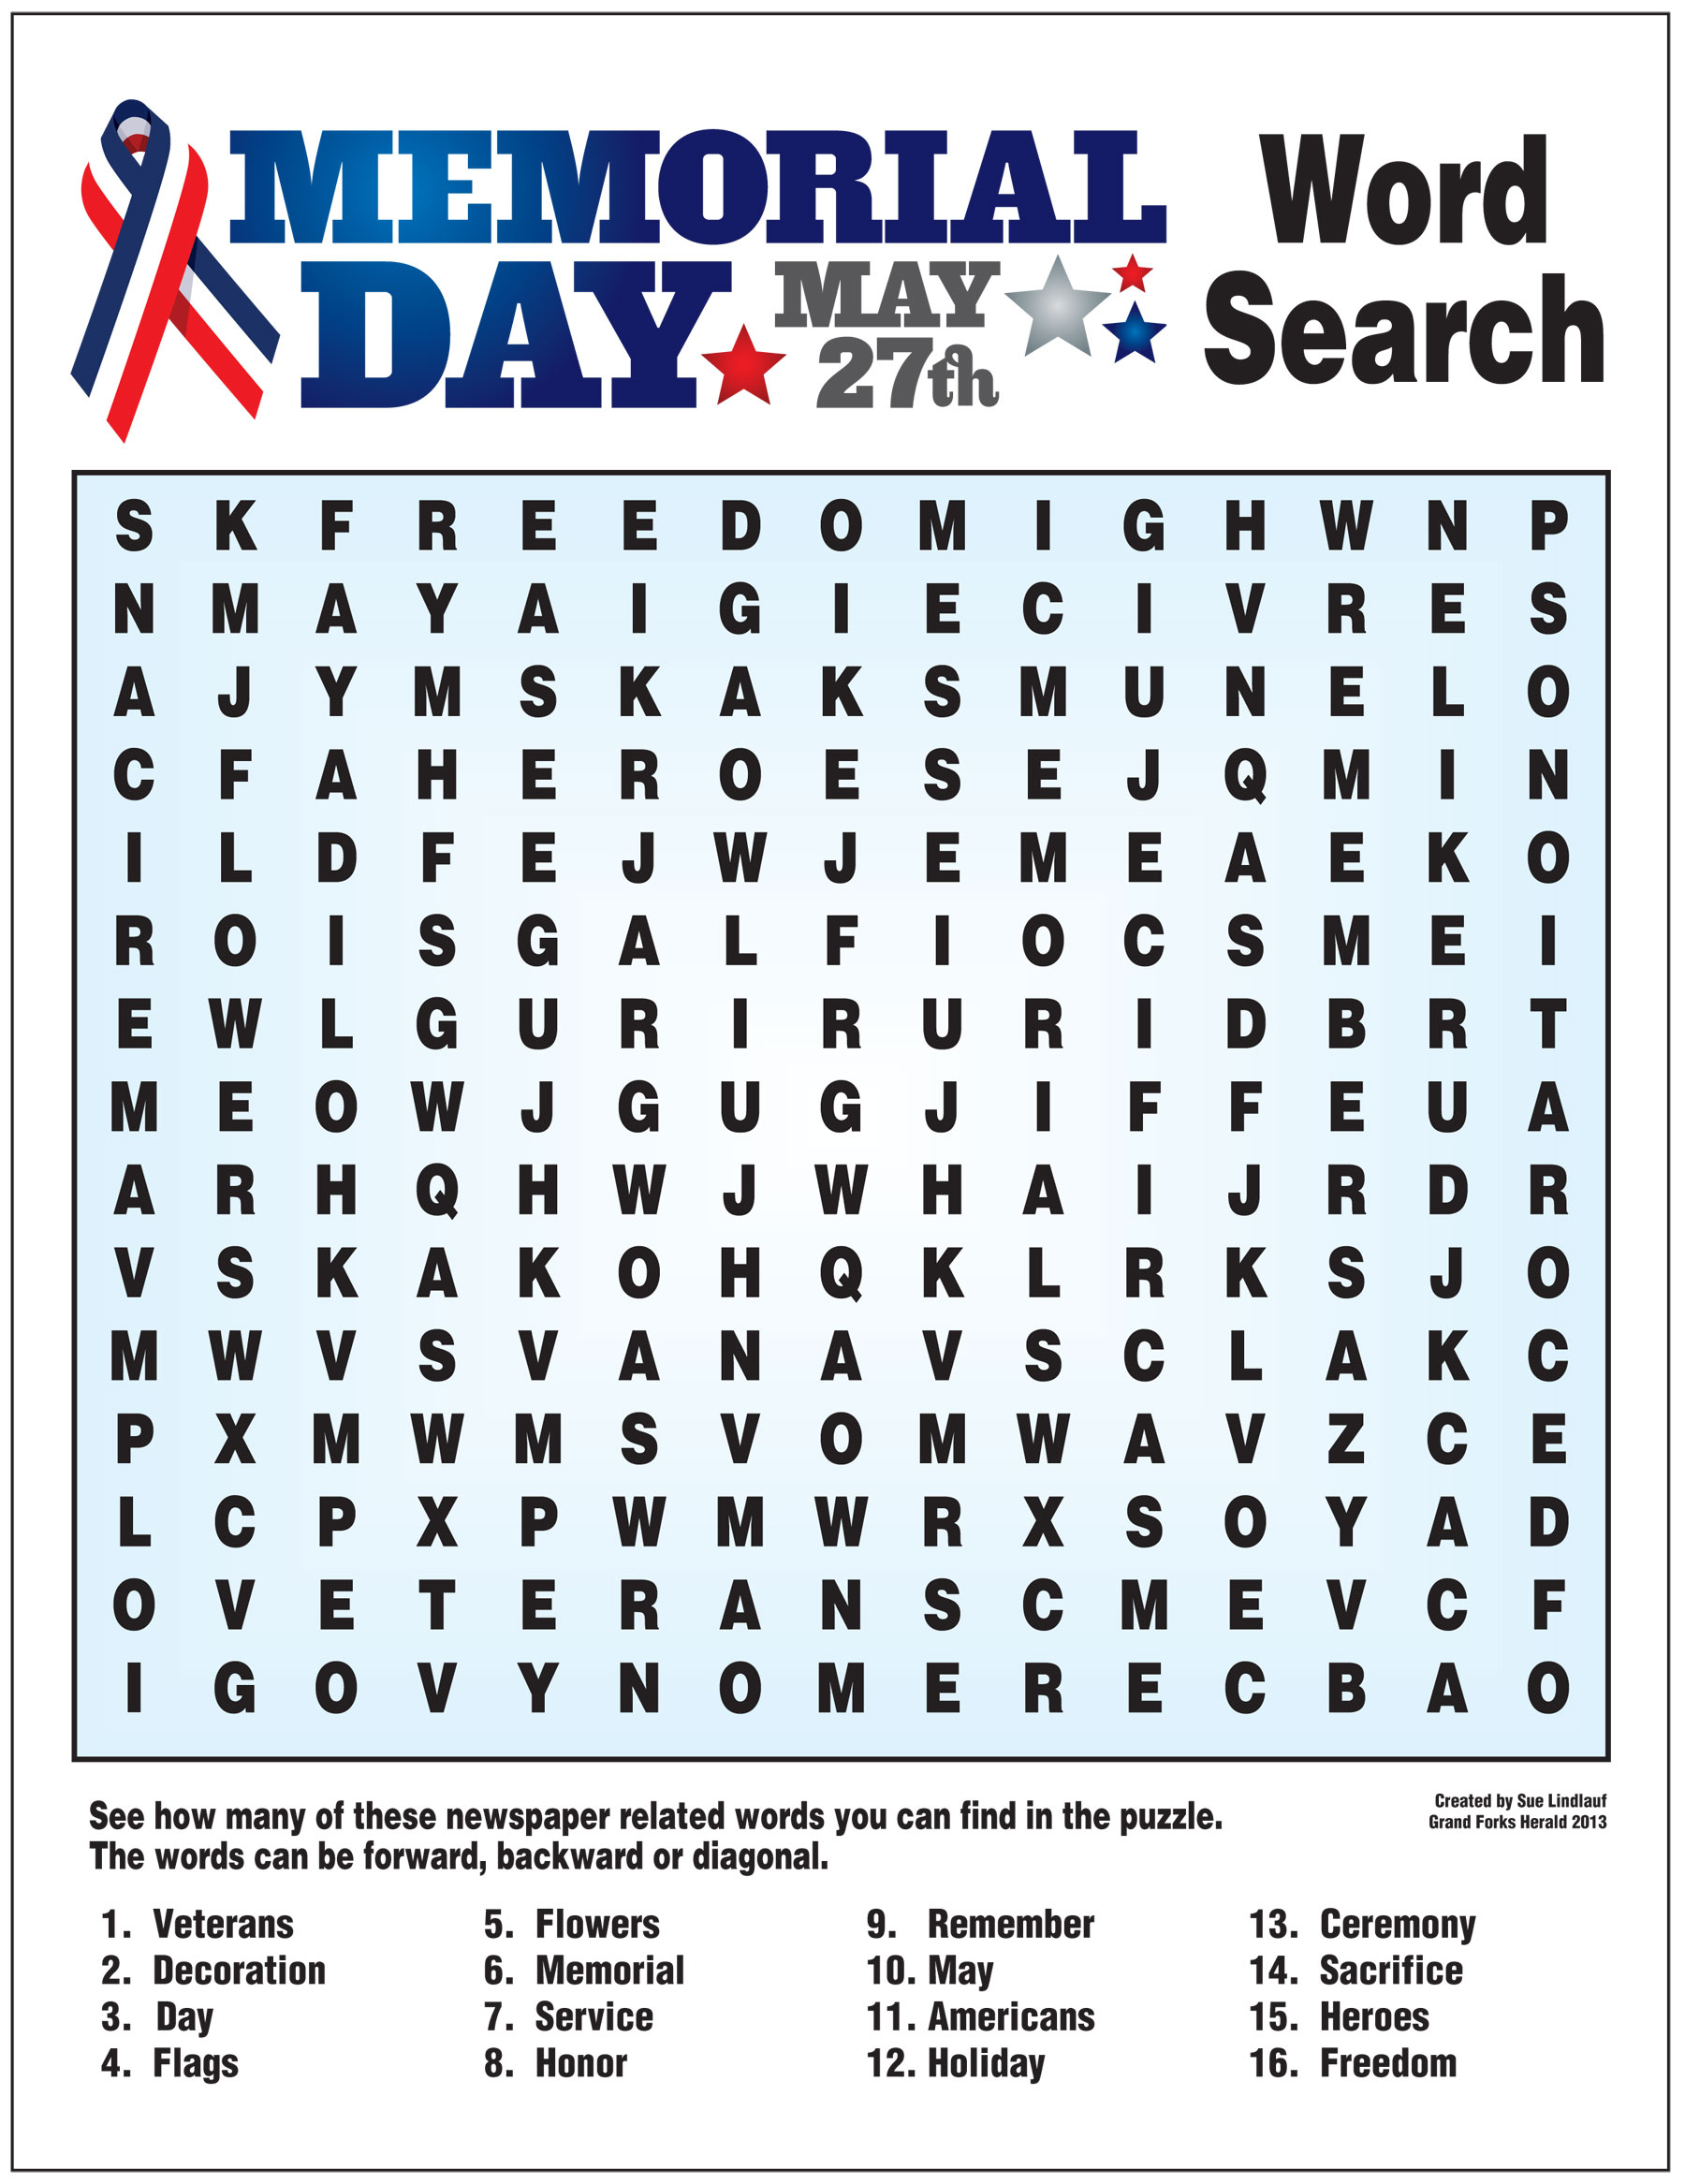 Memorial Day - Lessons - Tes Teach - Memorial Day Crossword Puzzle Printable